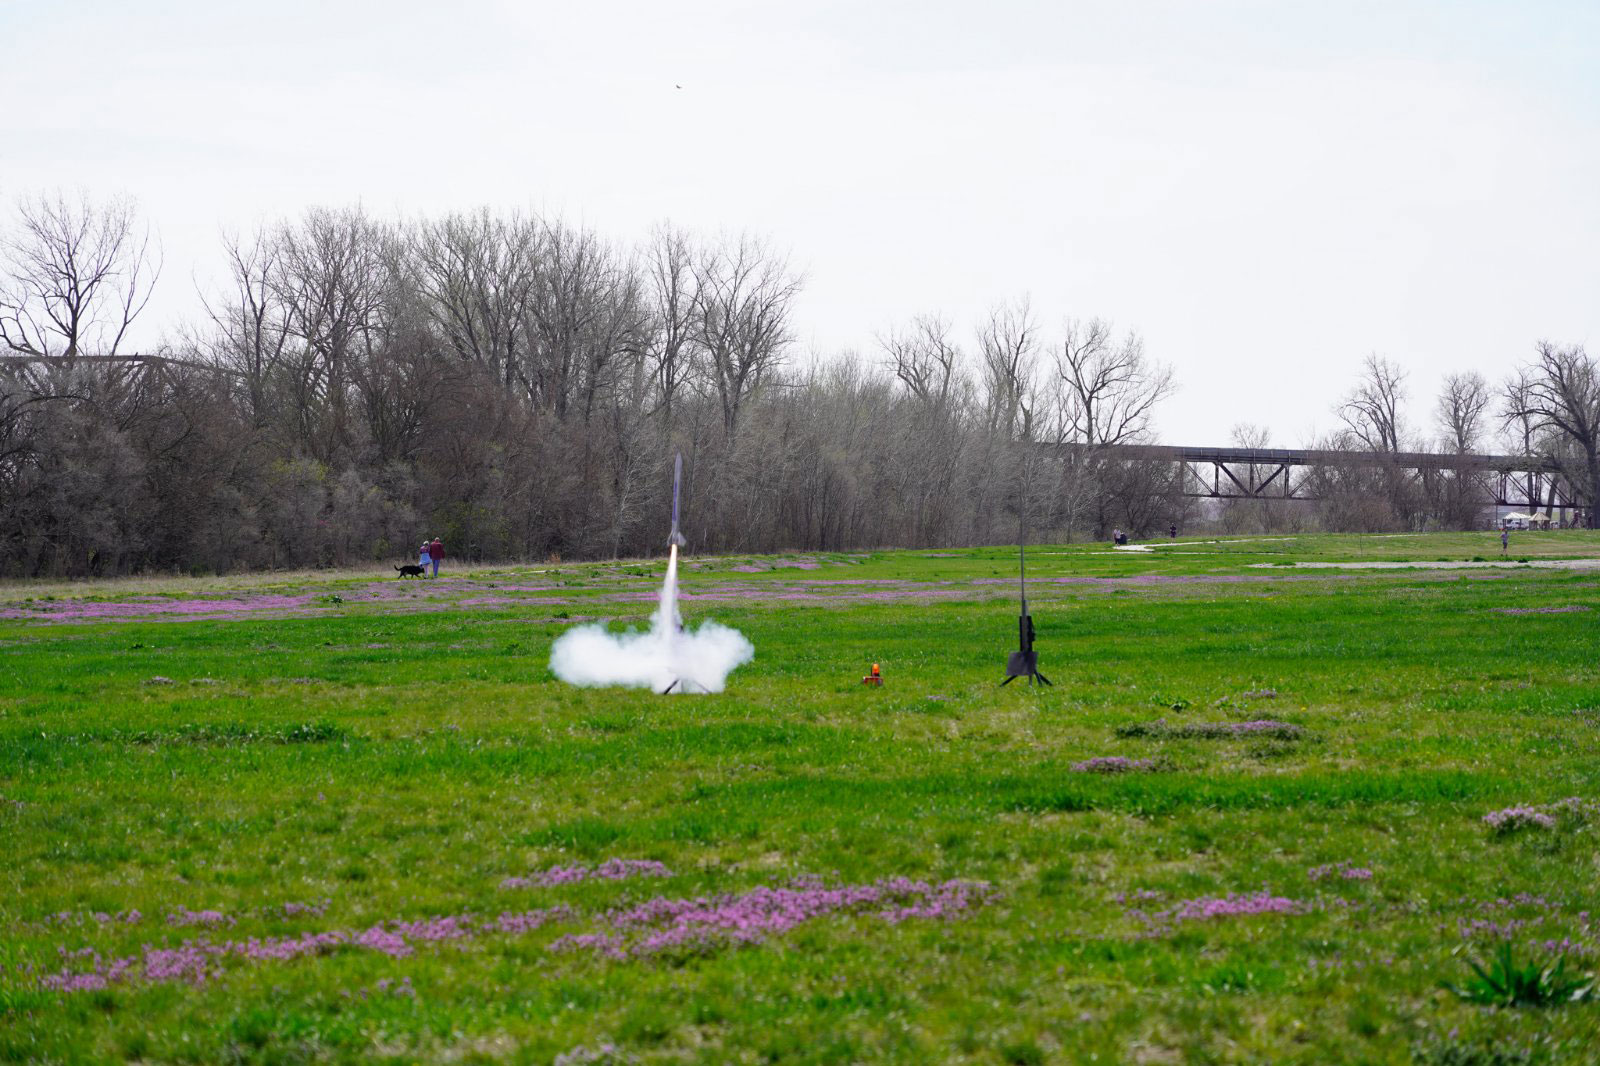 The Heartland Organization of Rocketry hosts Family Fun Day, supported by Lozier Community Grant program